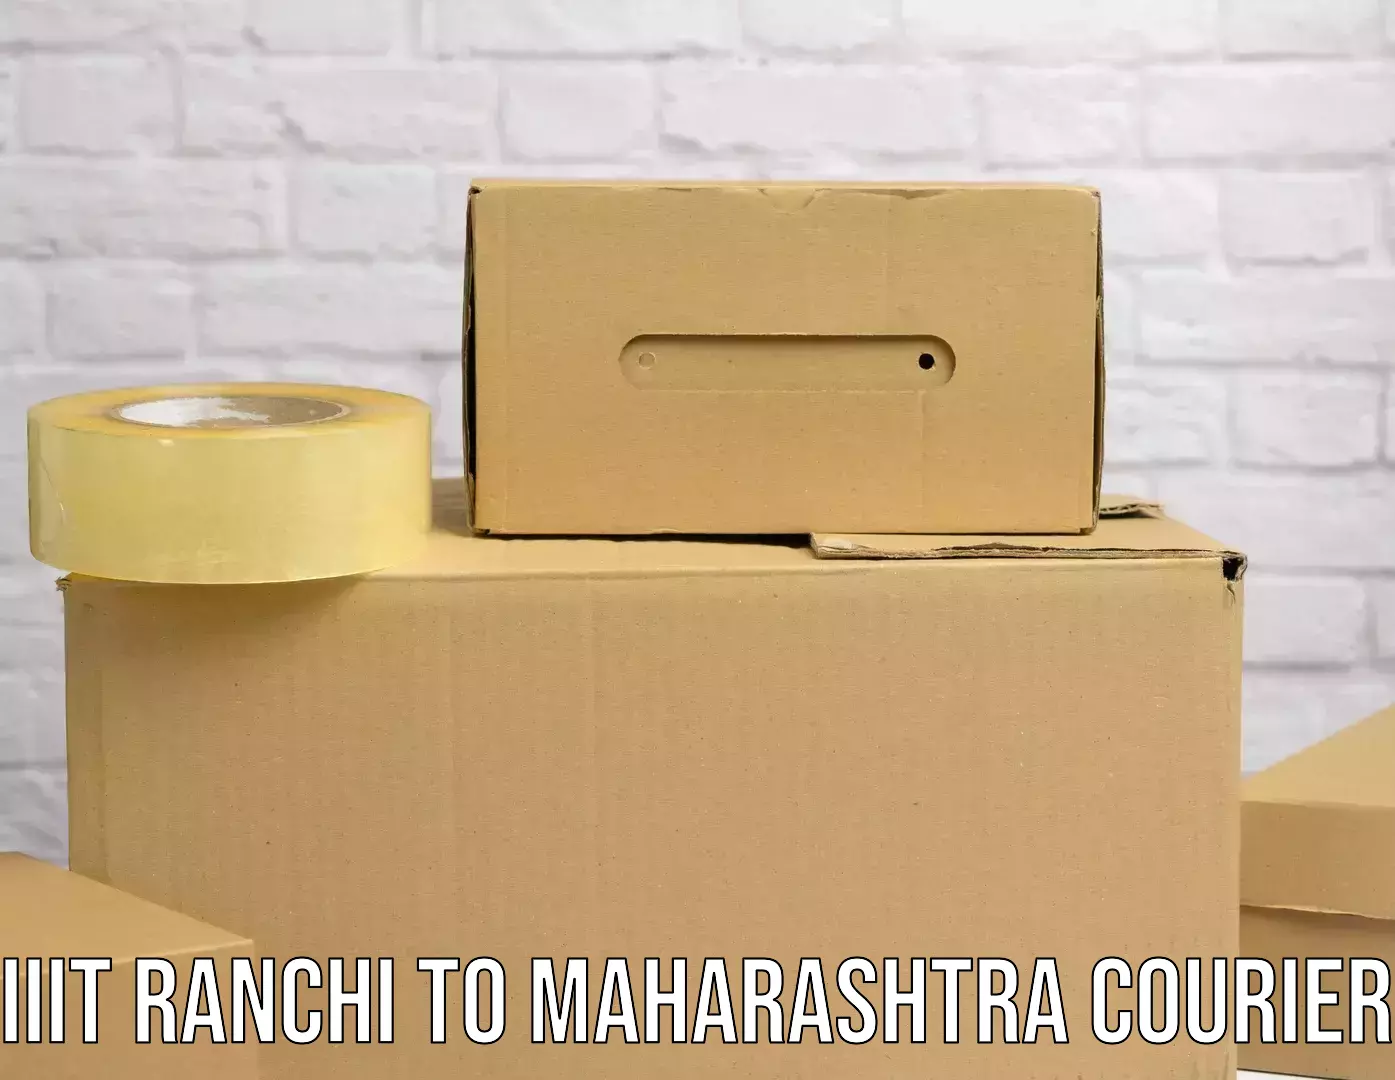 Nationwide parcel services IIIT Ranchi to Borivali